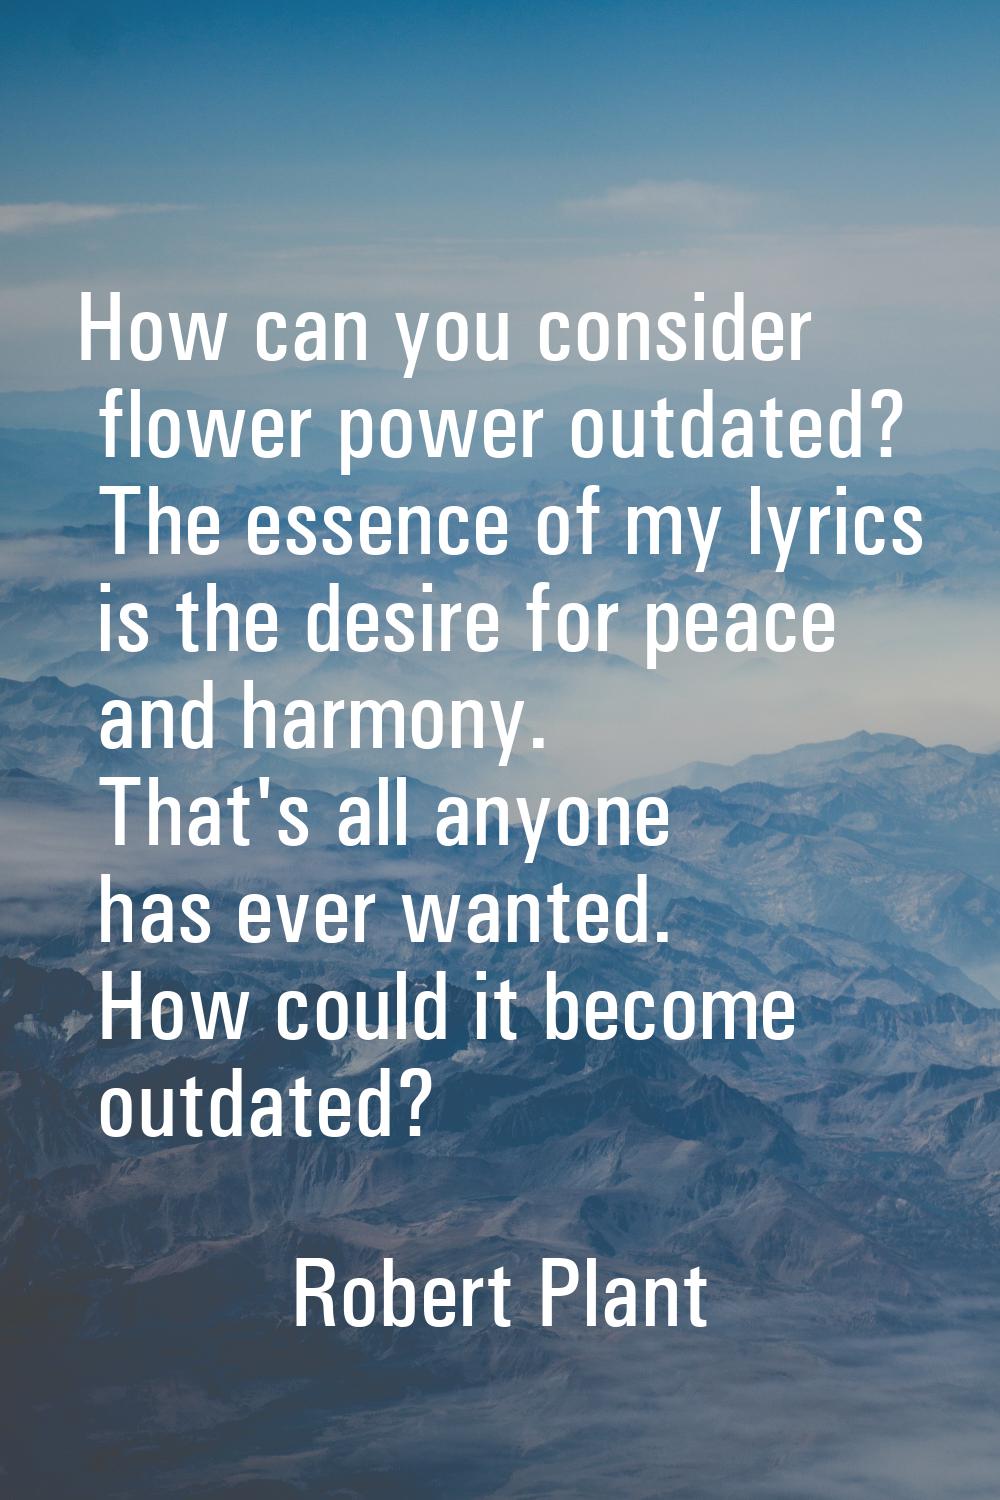 How can you consider flower power outdated? The essence of my lyrics is the desire for peace and ha